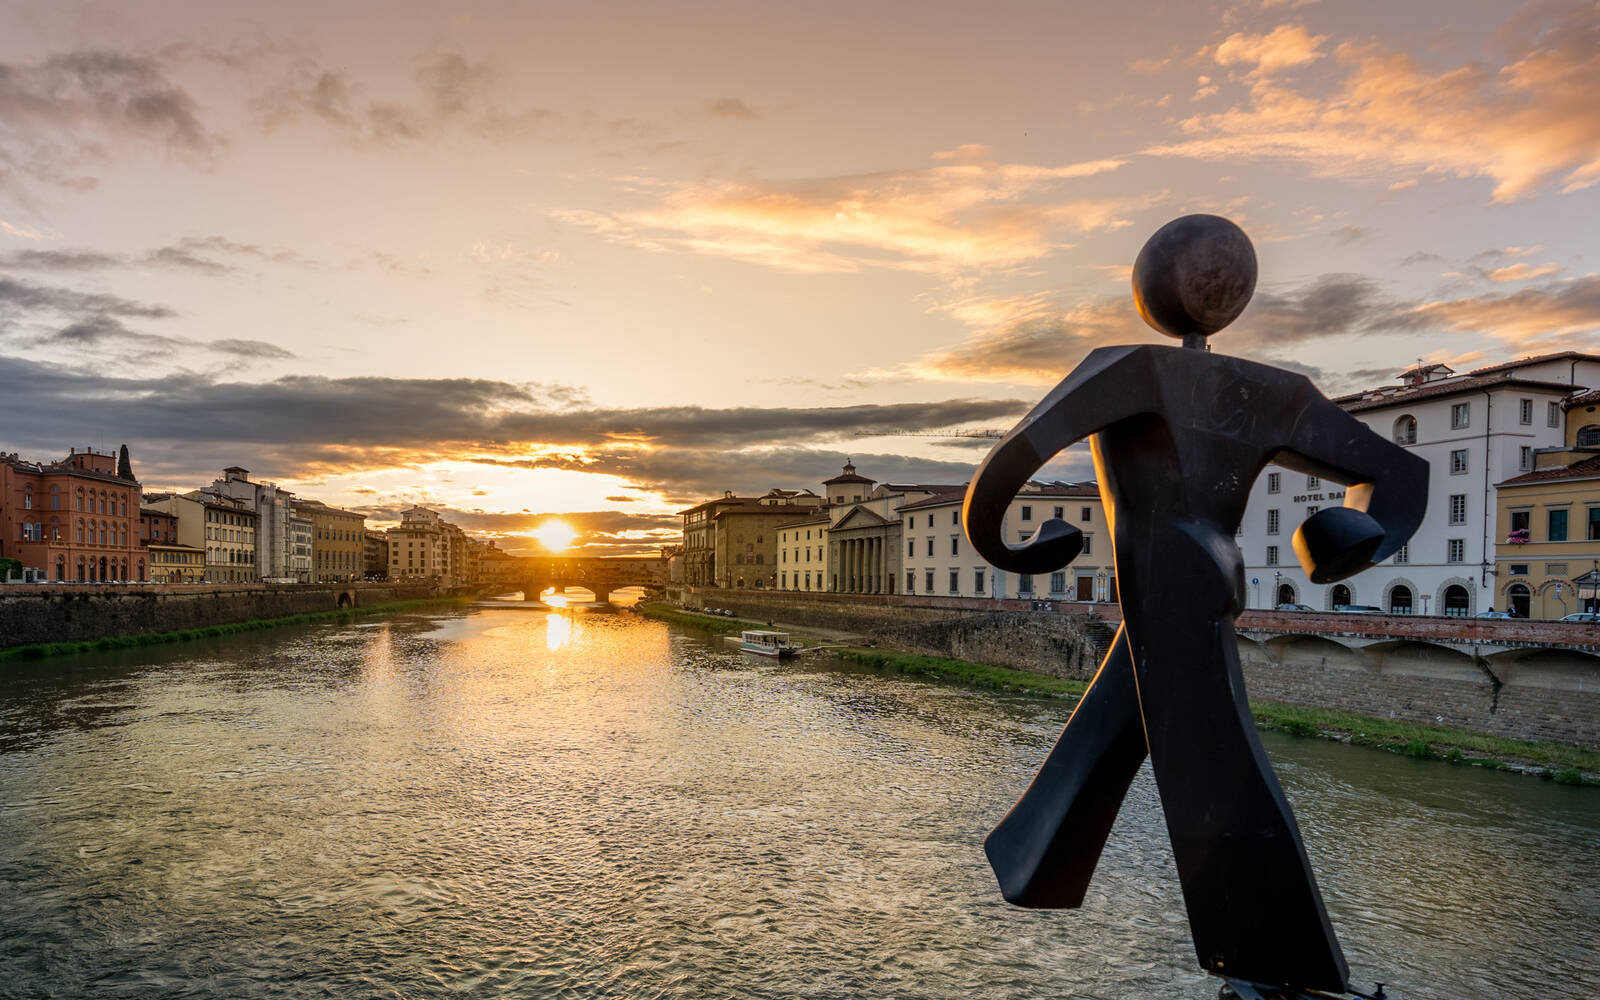 Image of Arno River & Ponte Vecchio, Florence by Mikki Young